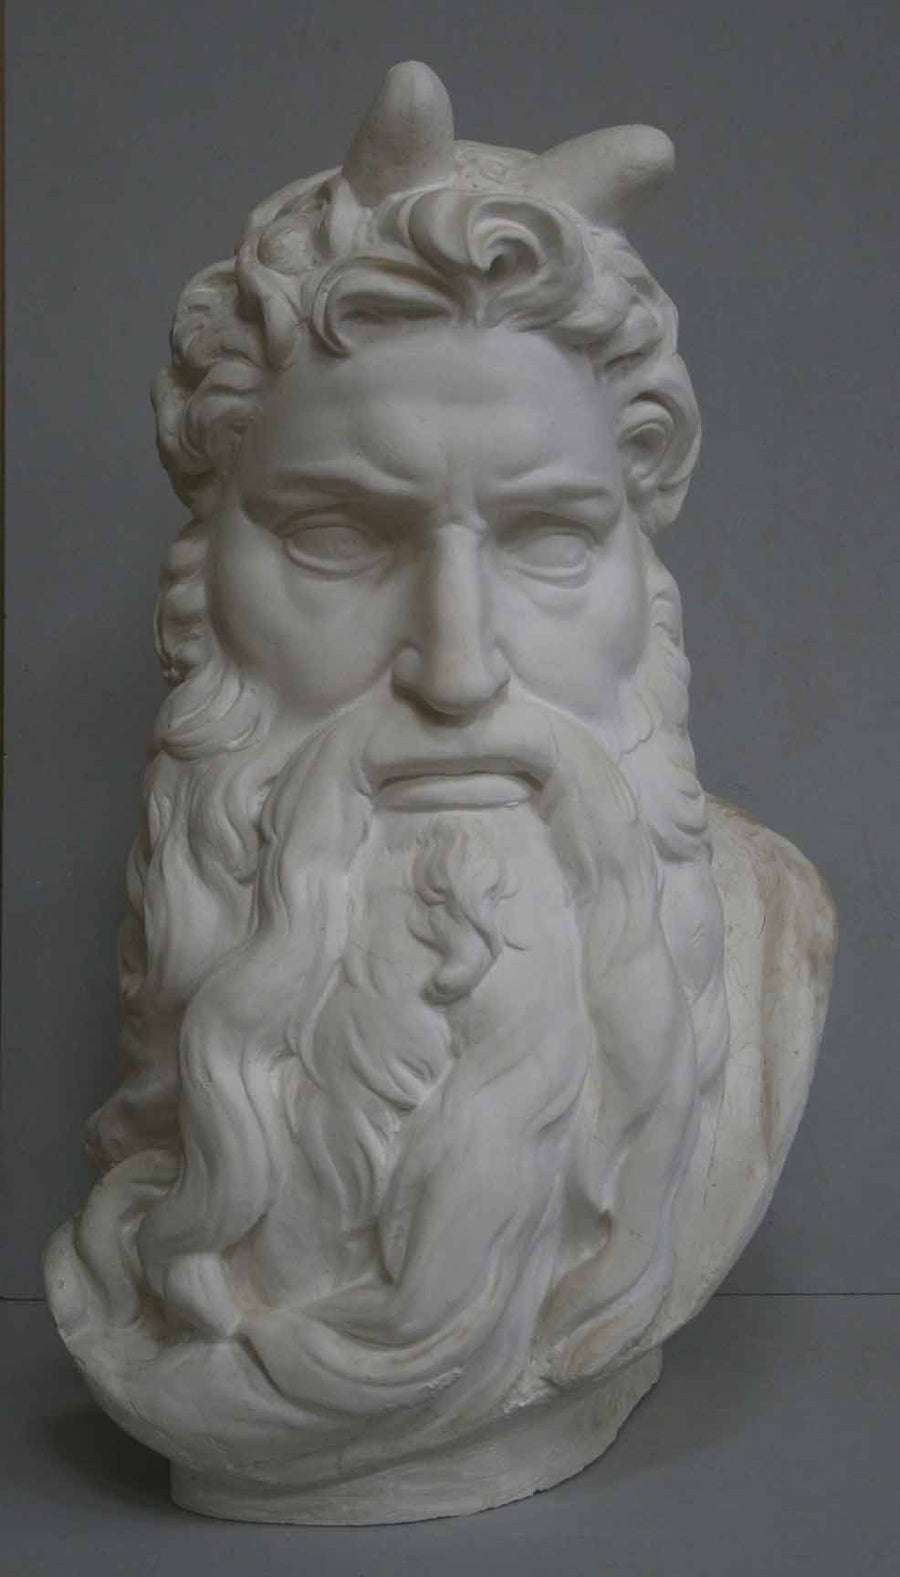 photo of plaster cast bust of man, namely Moses, with curly hair and so-called horns and long beard on gray background